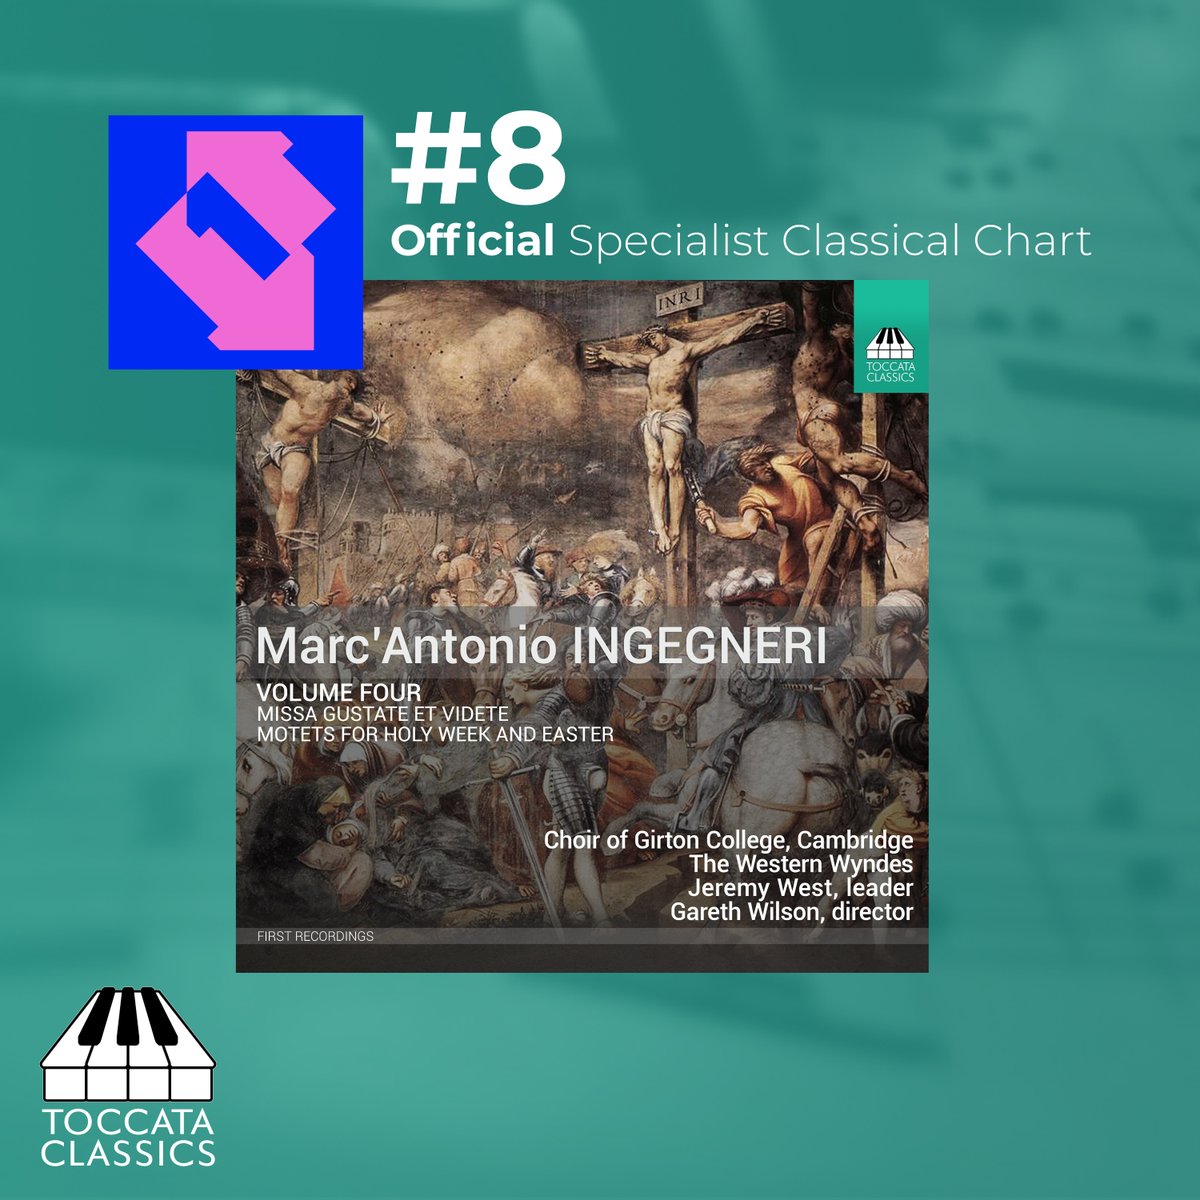 Congratulations to the @girtoncollegechoir, The Western Wyndes, @jeremyscornetts, and @nota1cambiata! Their fourth volume of Marc'Antonio Ingegneri makes its @officialcharts UK debut at #8! And perfectly timed for Holy Week and Easter! Listen now at listn.fm/ingegneriv4